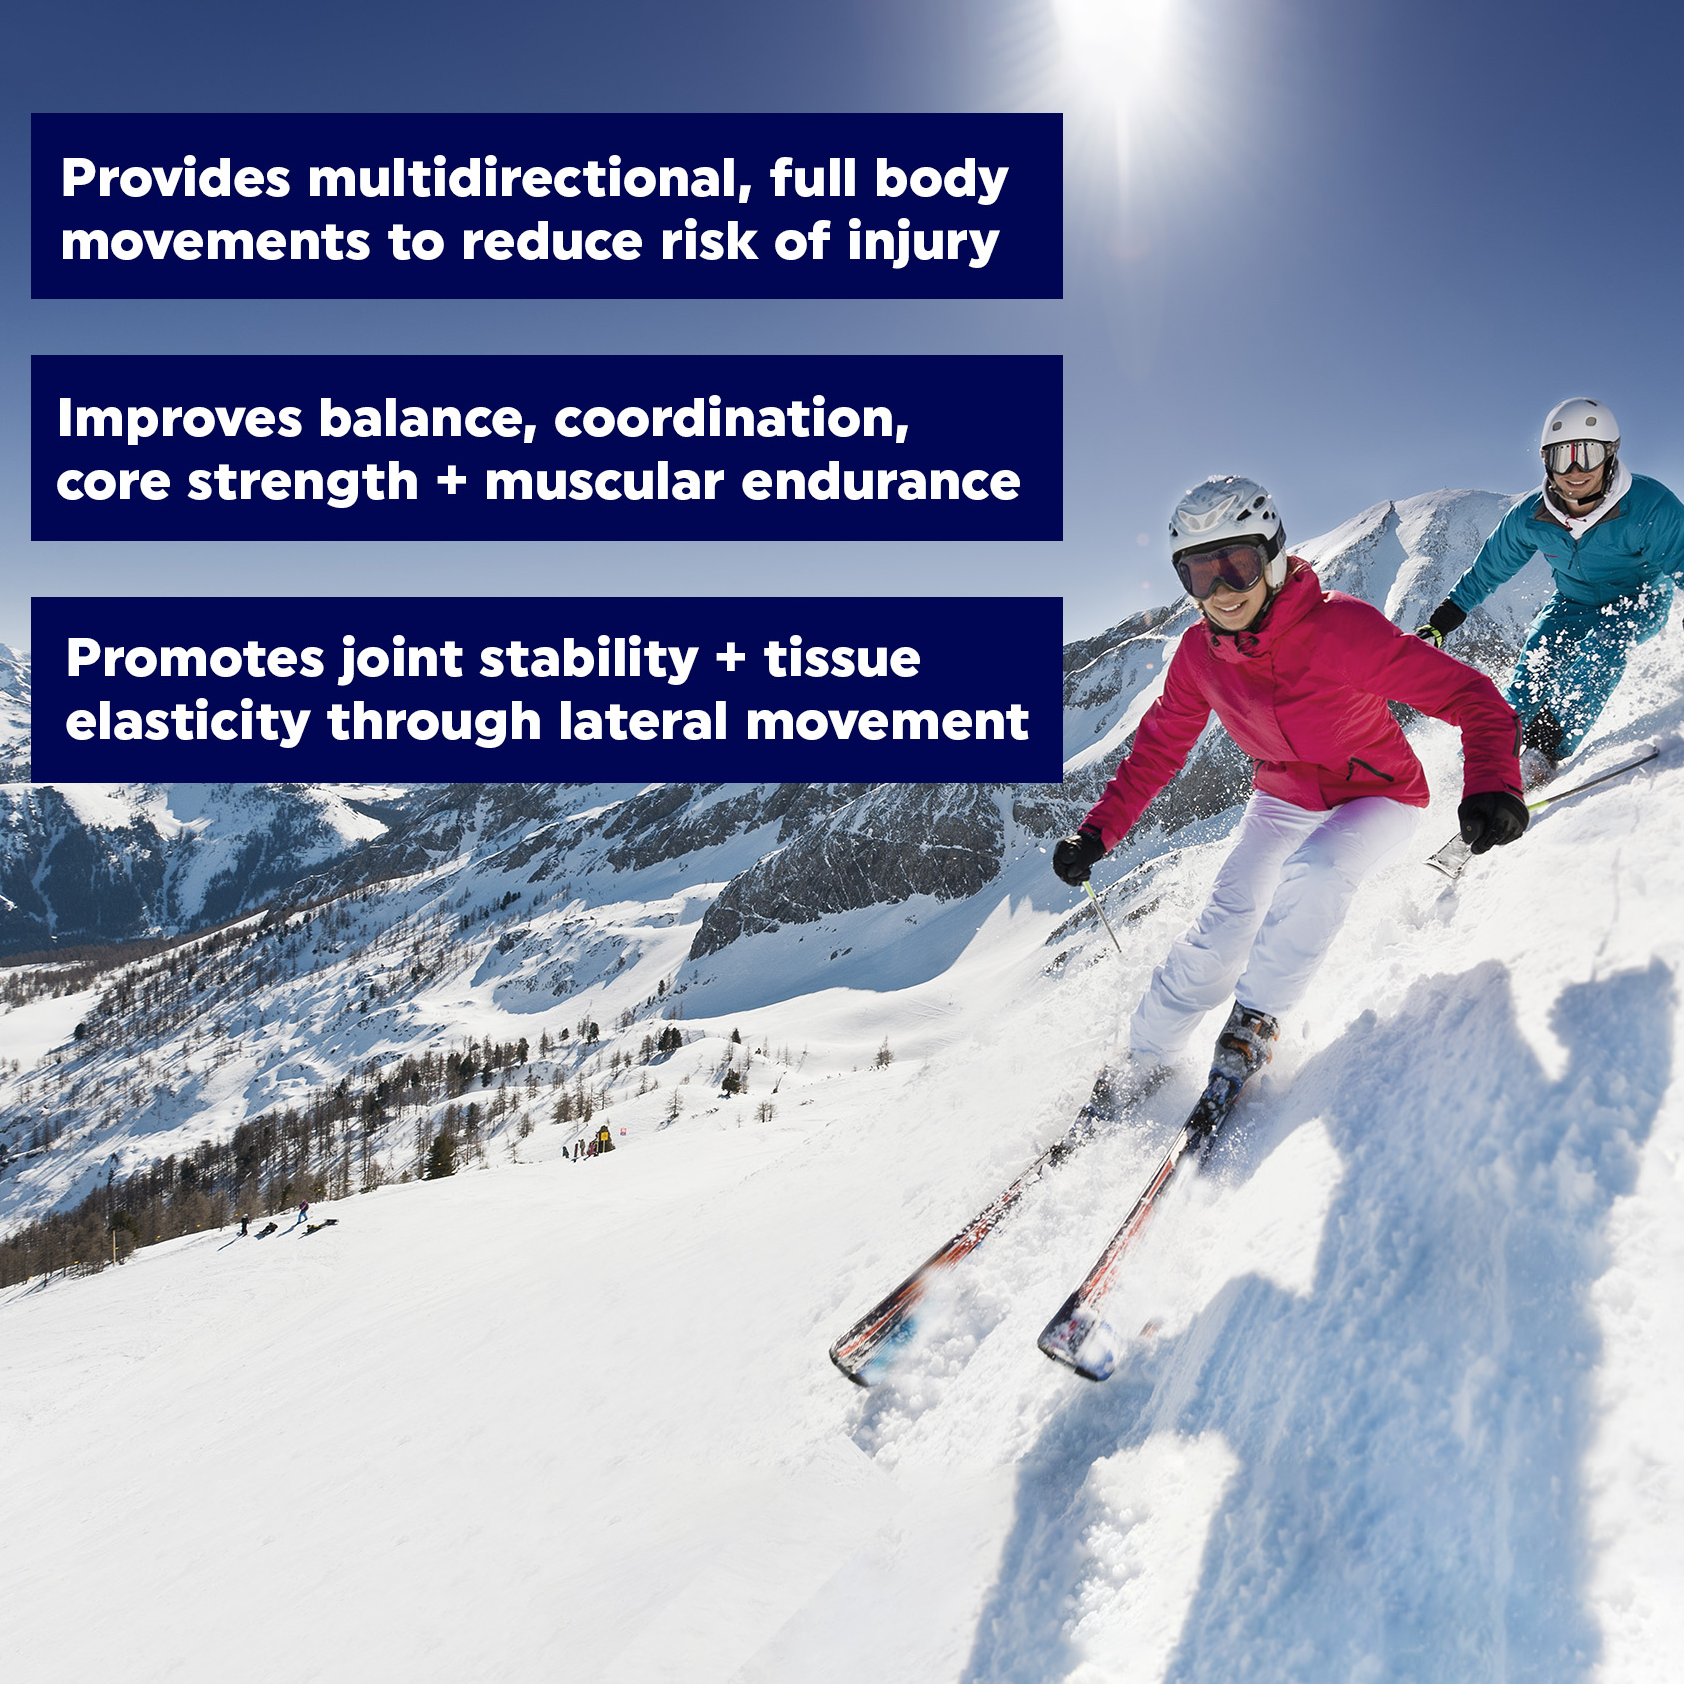 Two people skiing down a mountain. Provide multidirectional, full body movement to reduce risk of injury. Improves balance, coordination, core strength and muscular endurance. Promotes joint stability and tissue elasticity through lateral movement.